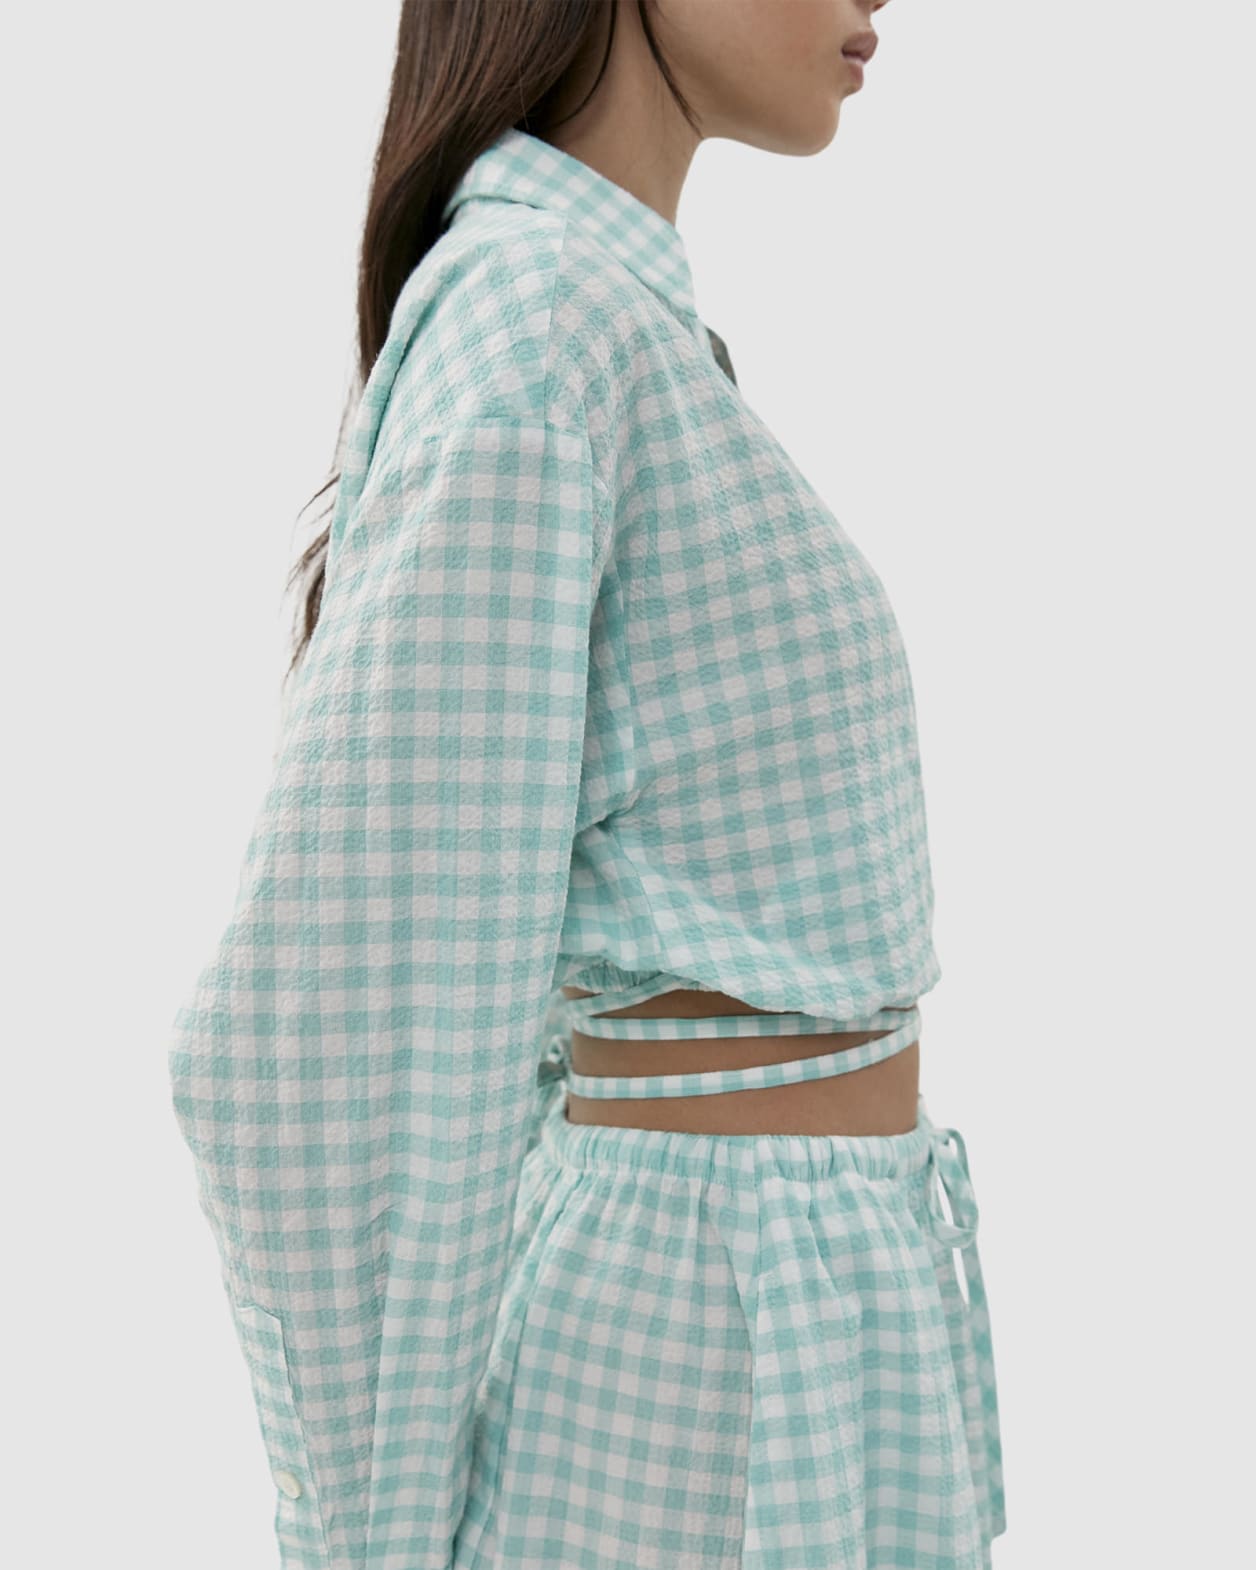 Picnic Wrap Top in MINT